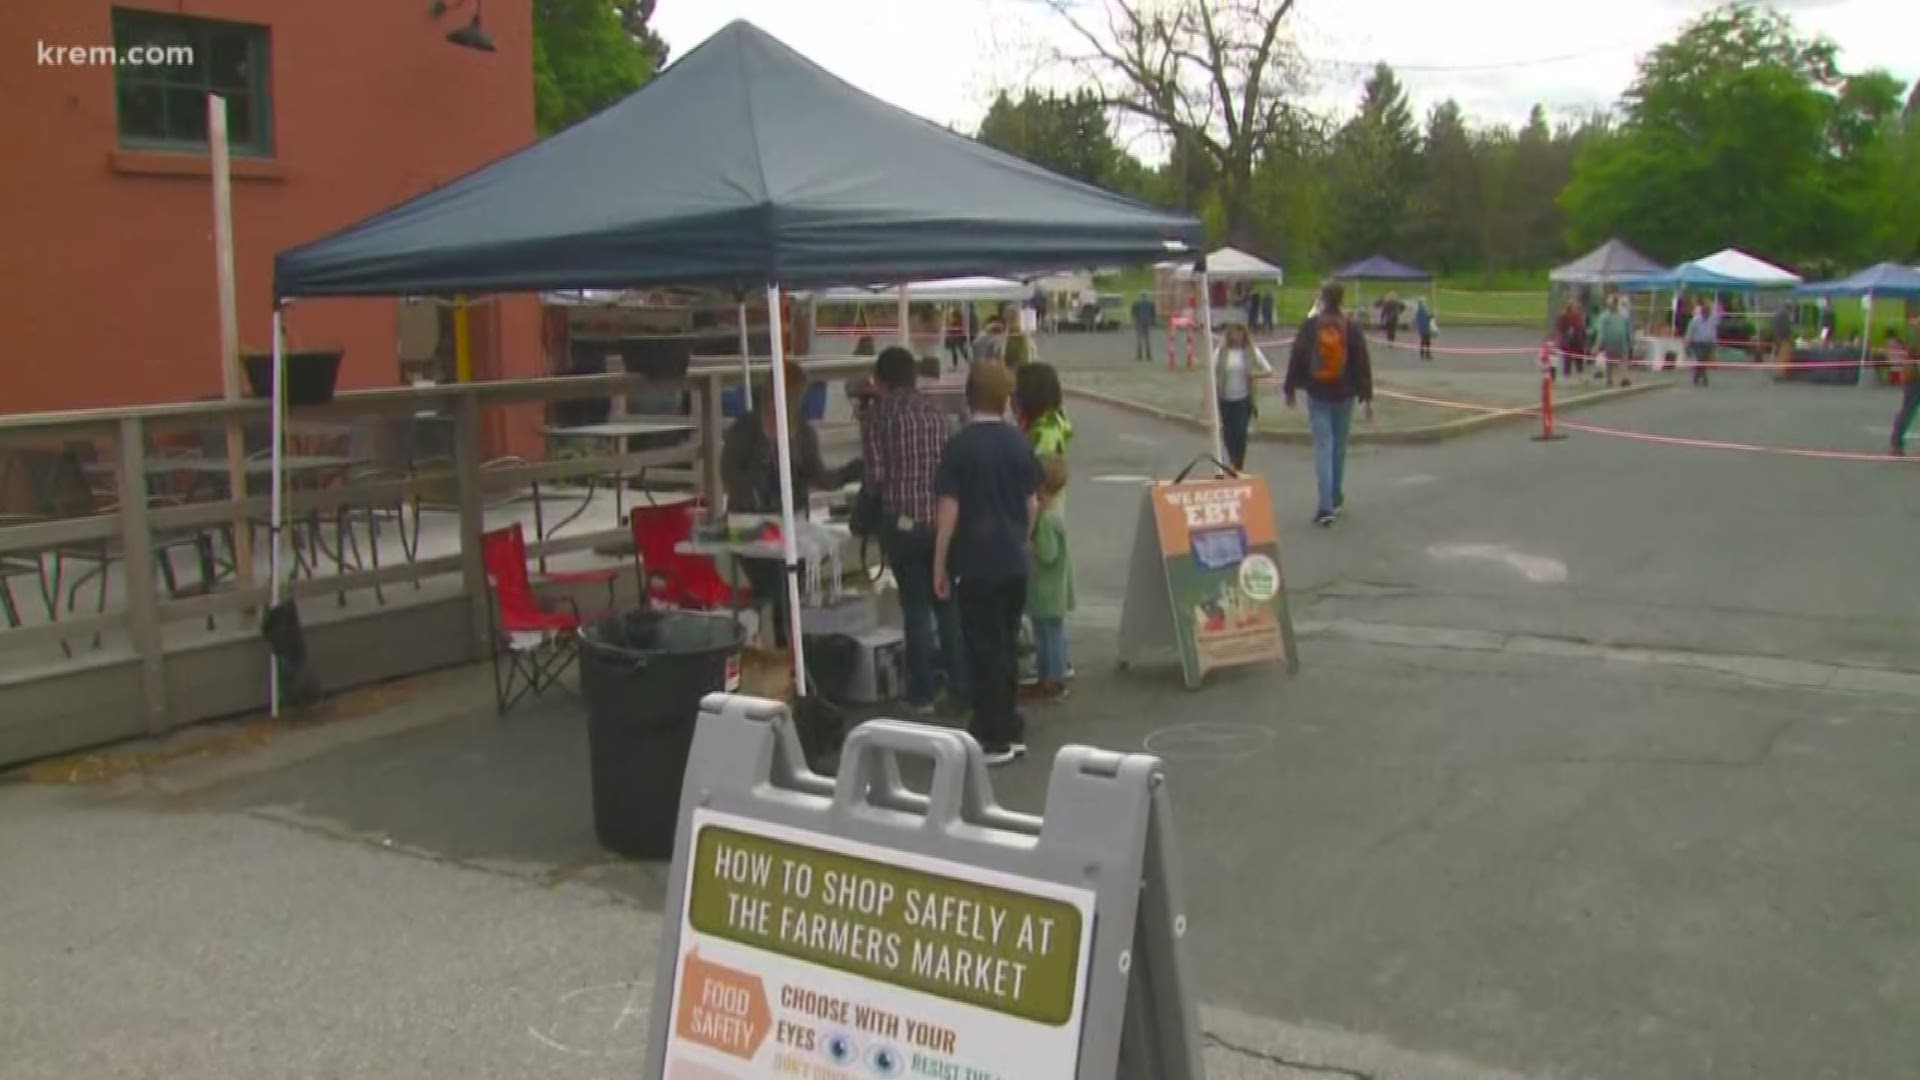 The state Department of Health has recommended that farmers markets only allow vendors that provide essential services, and do not schedule live music.